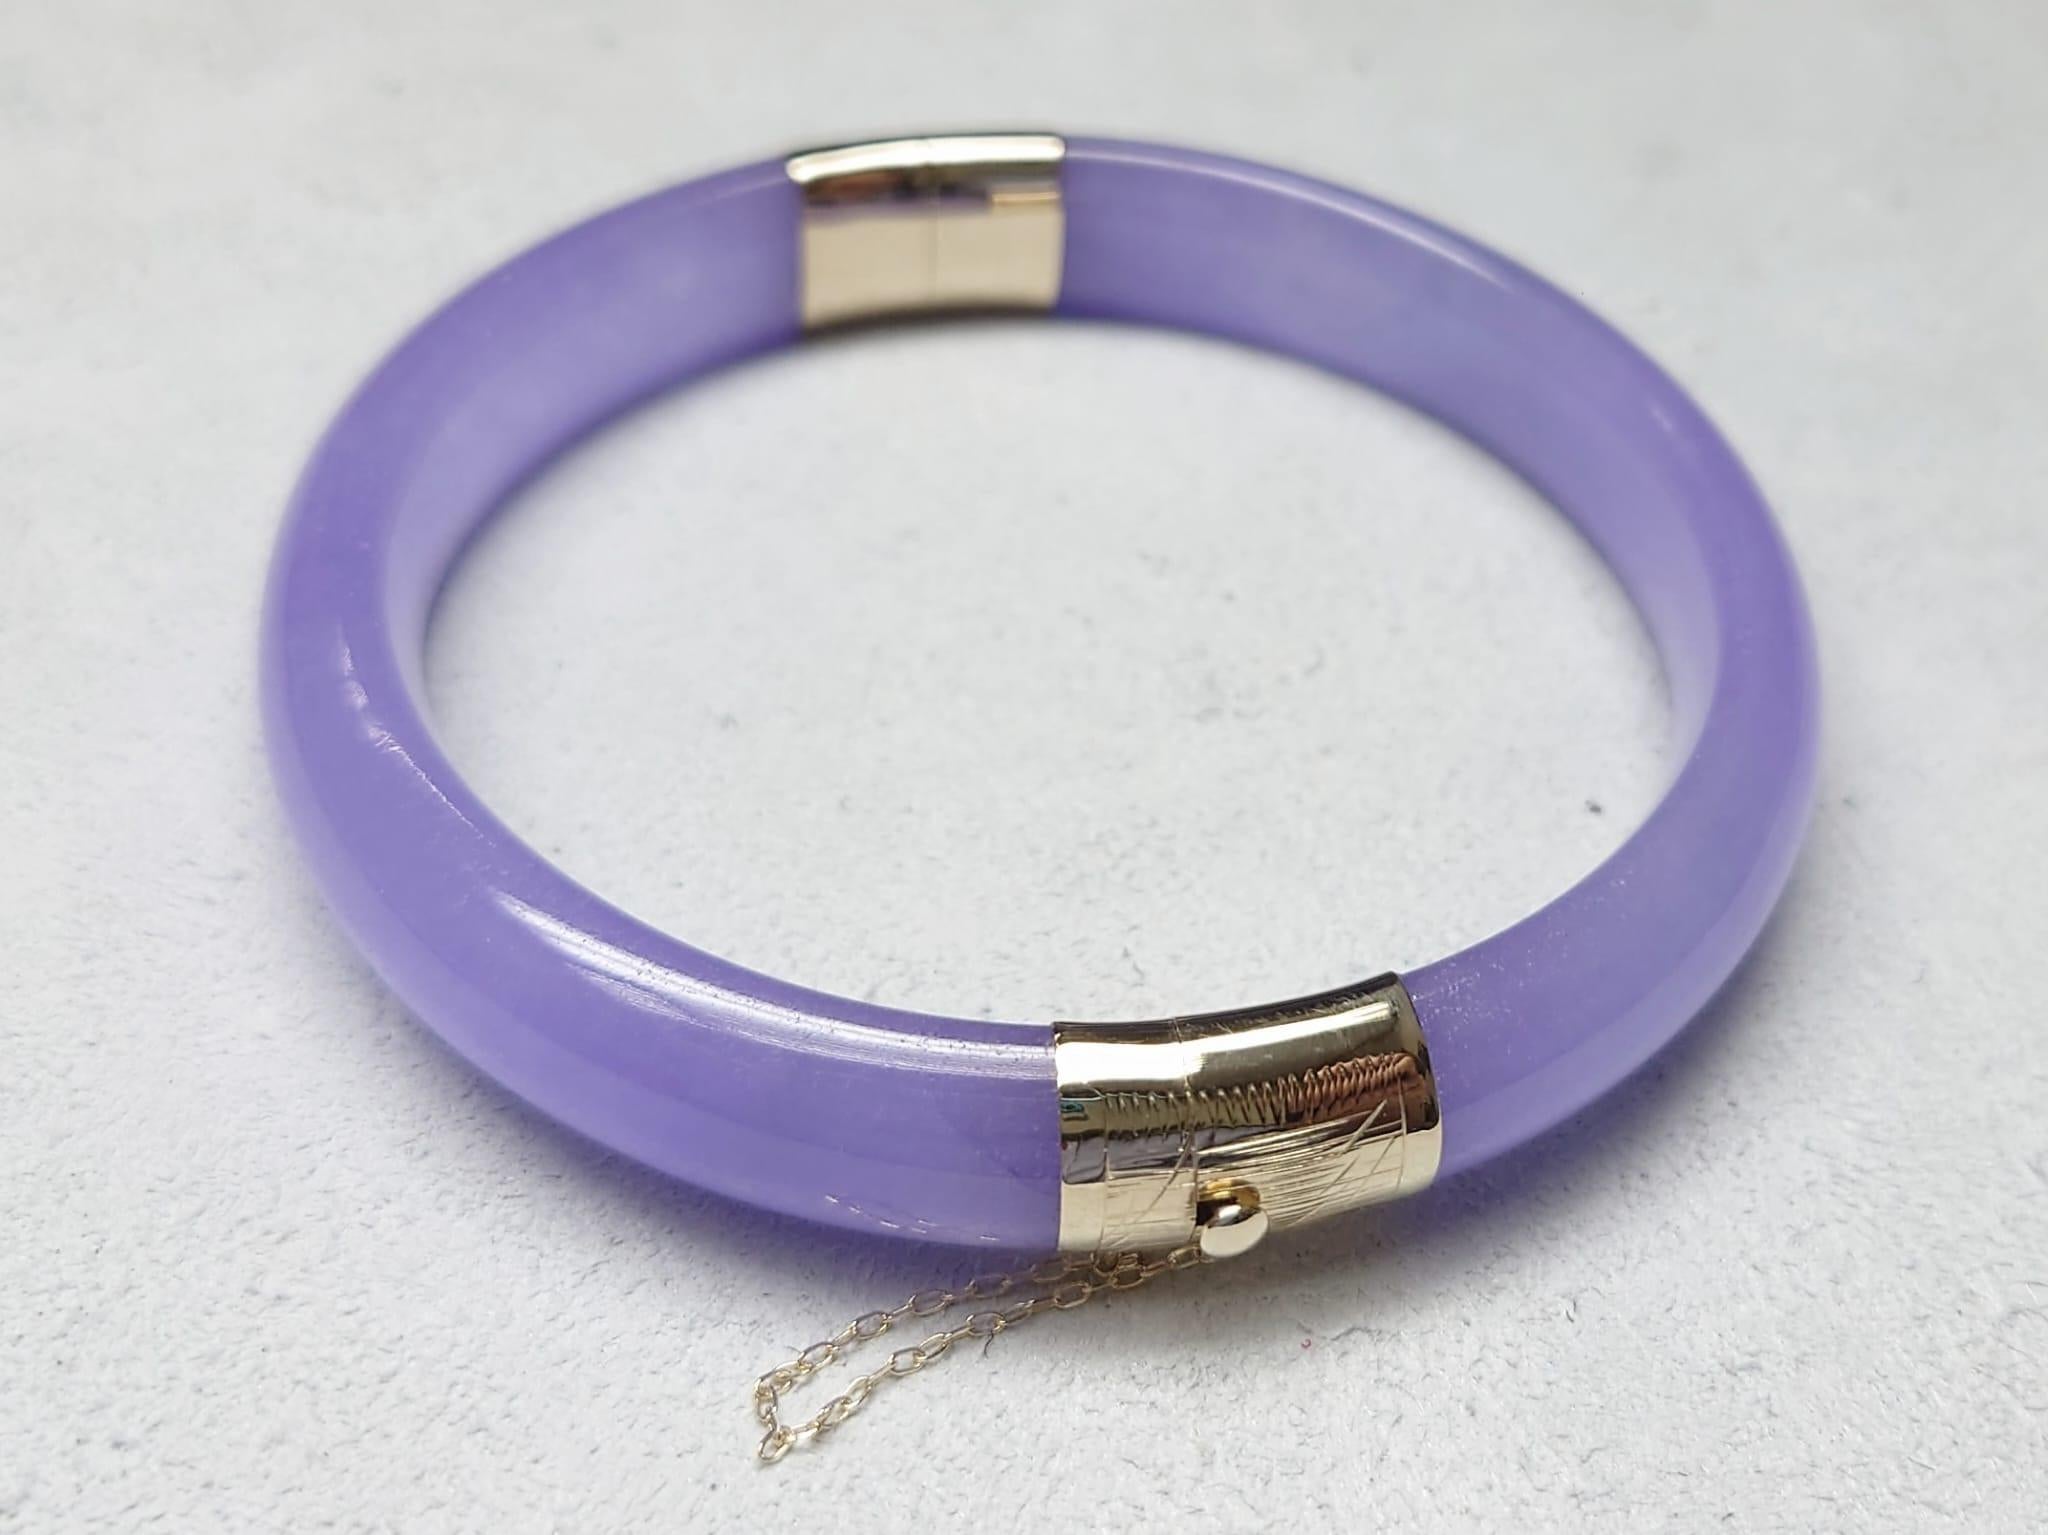 Viceroy's Circular Lavender Jade Bangle Bracelet (with 14K Yellow Gold) For Sale 11